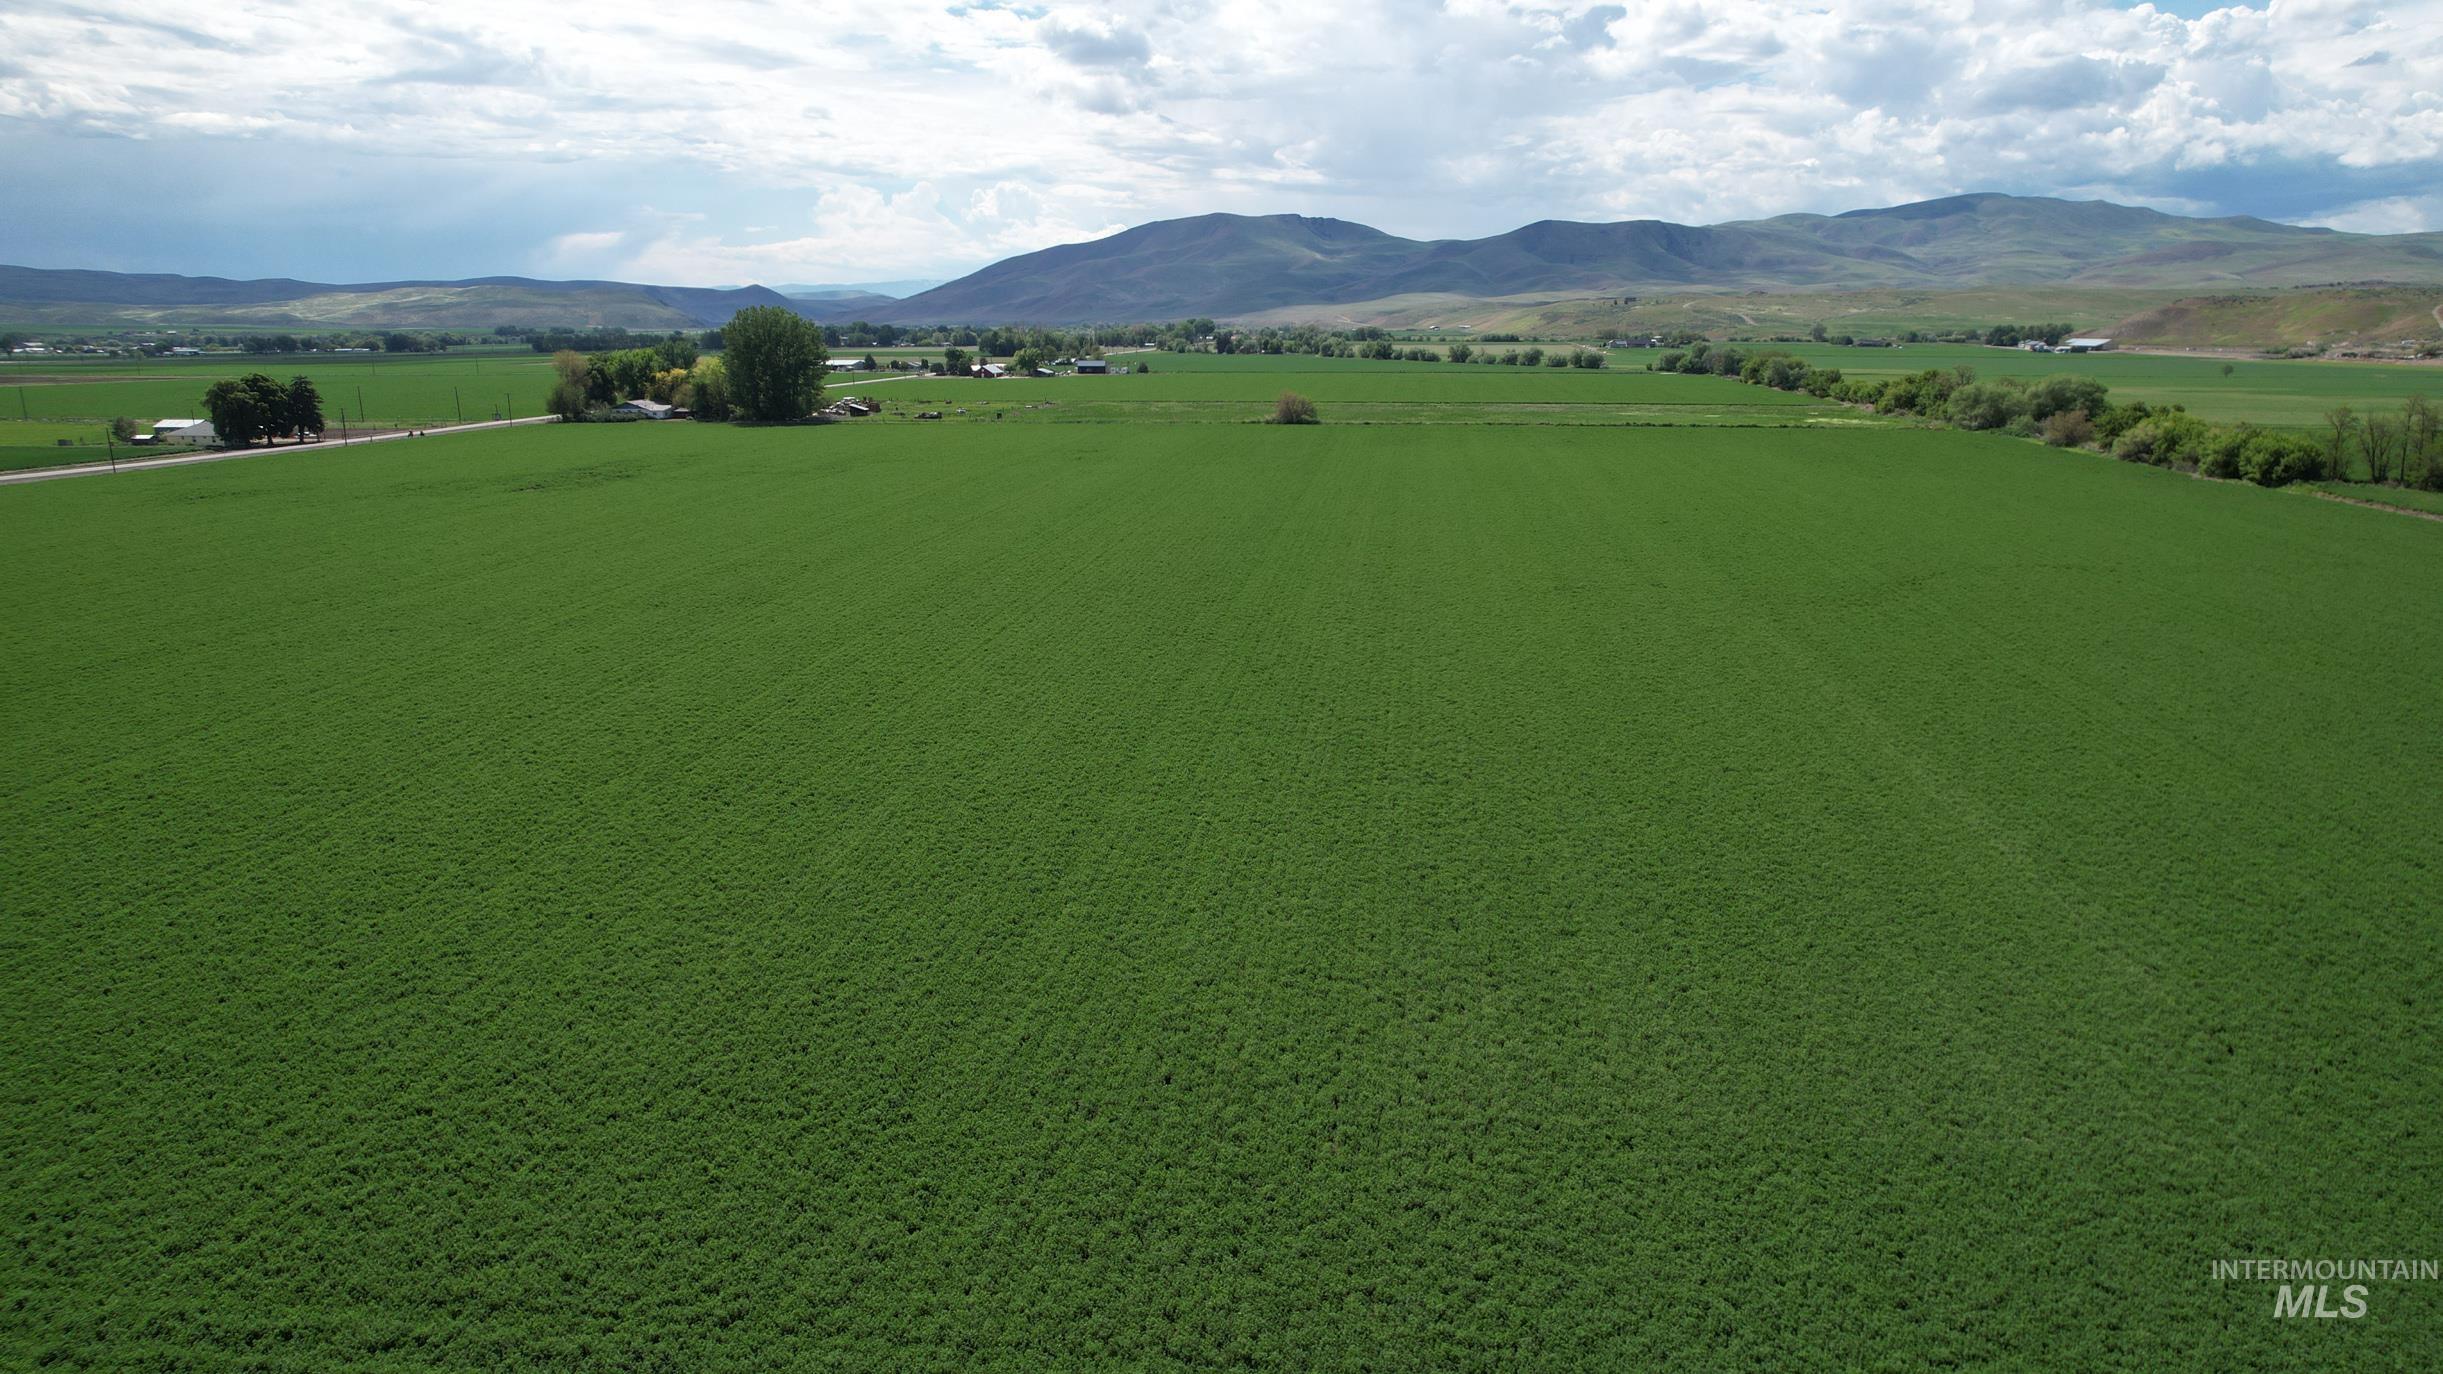 0 Olds Ferry Road, Weiser, Idaho 83672, Farm & Ranch For Sale, Price $691,410,MLS 98882054